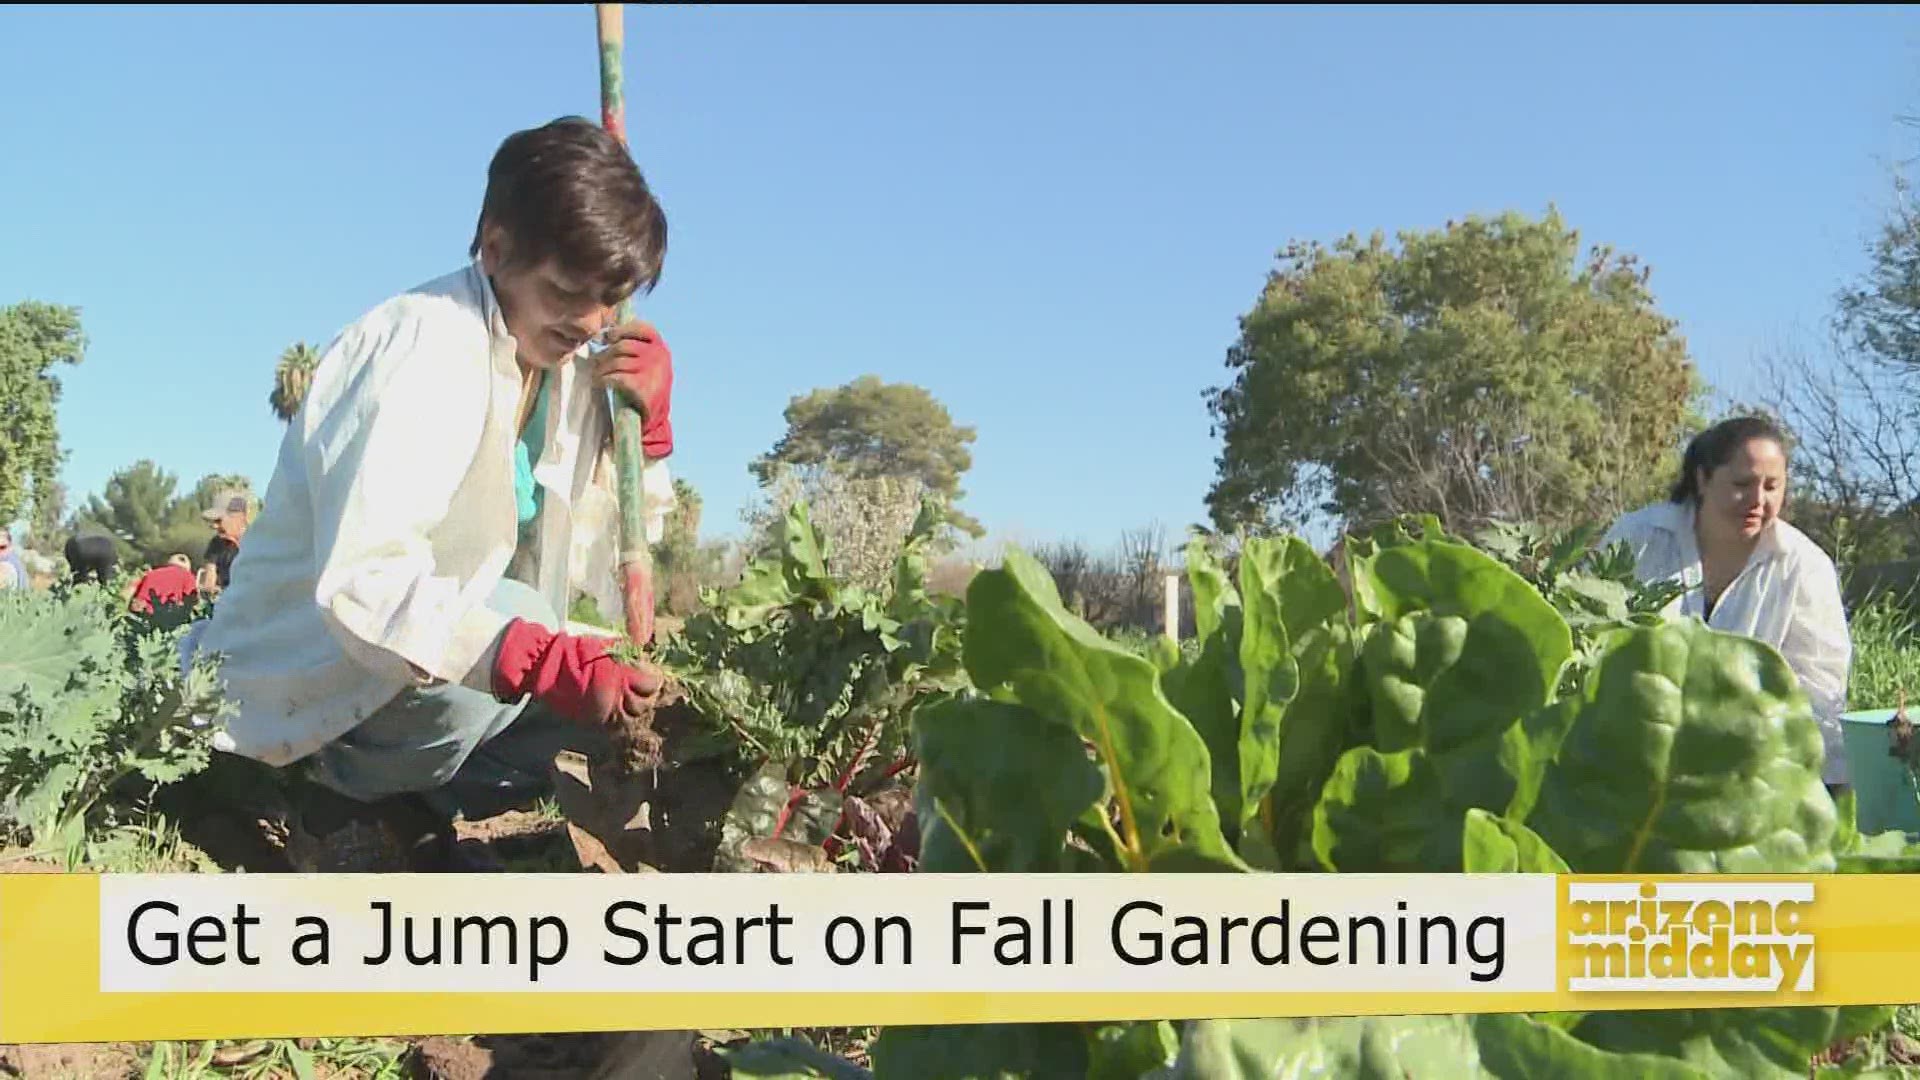 Greg Peterson, Founder of The Urban Farm, shows us how to get a head start on gardening for fall whether you have a big backyard to a small patio